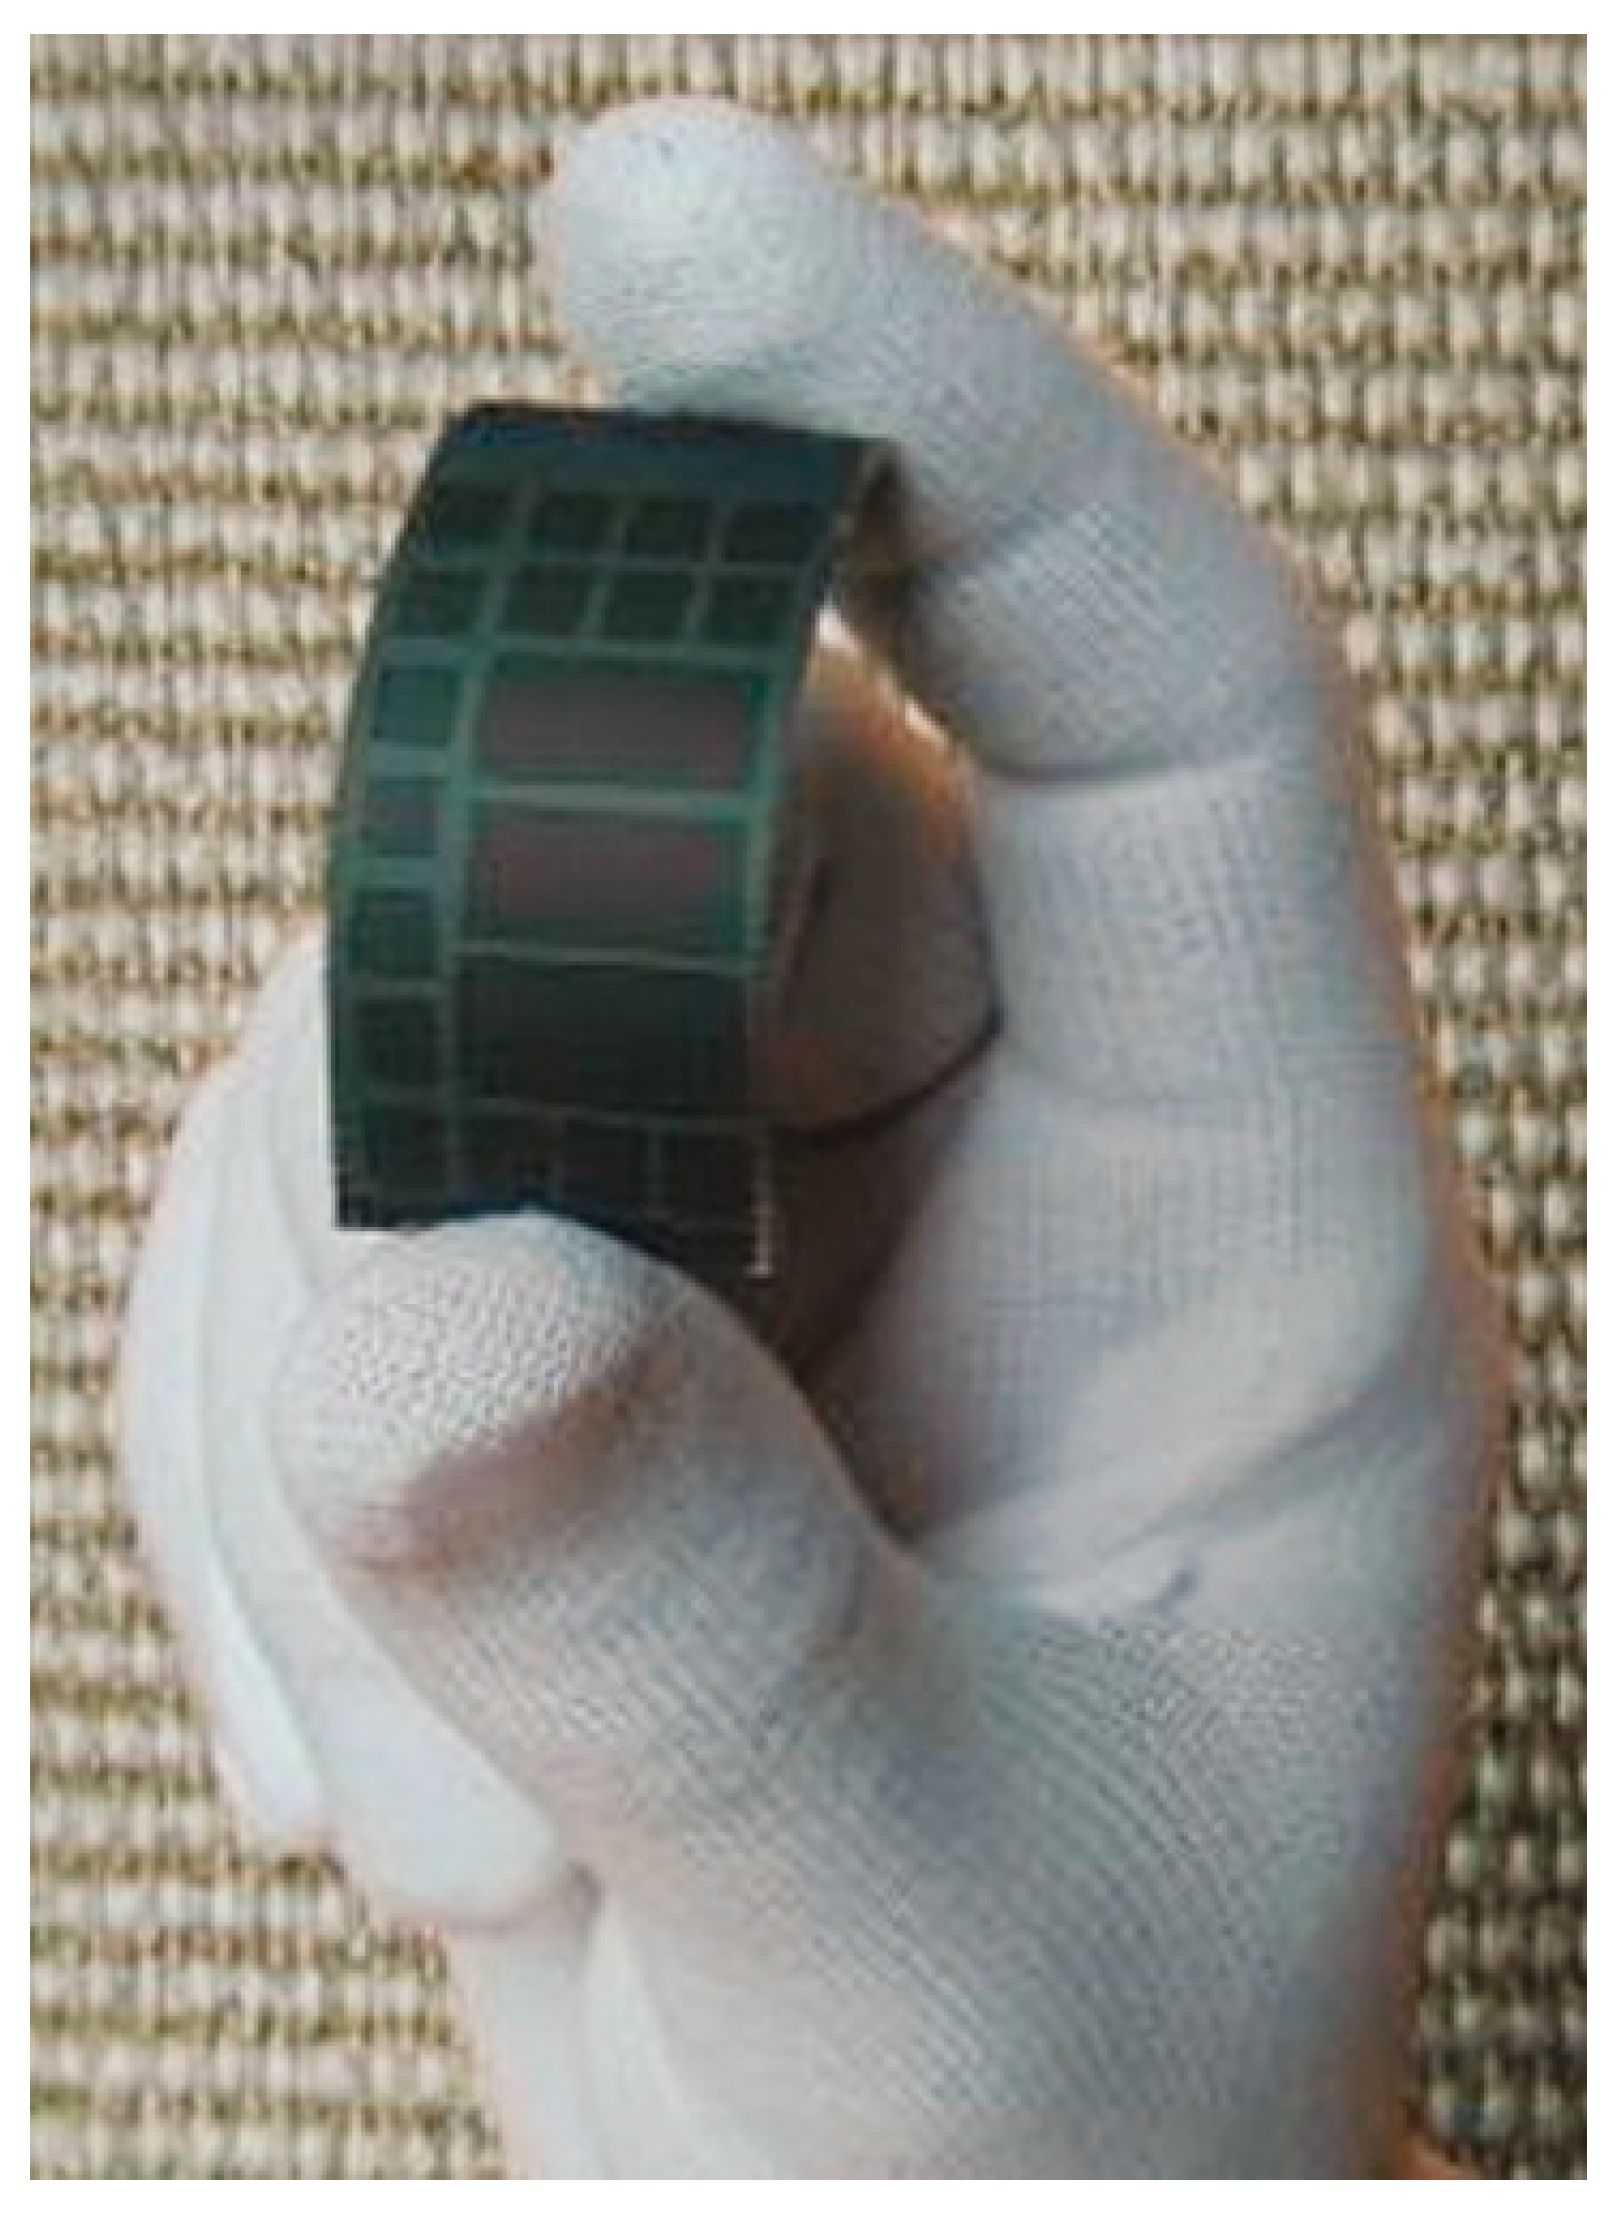 An investigation of a wash‐durable solar energy harvesting textile